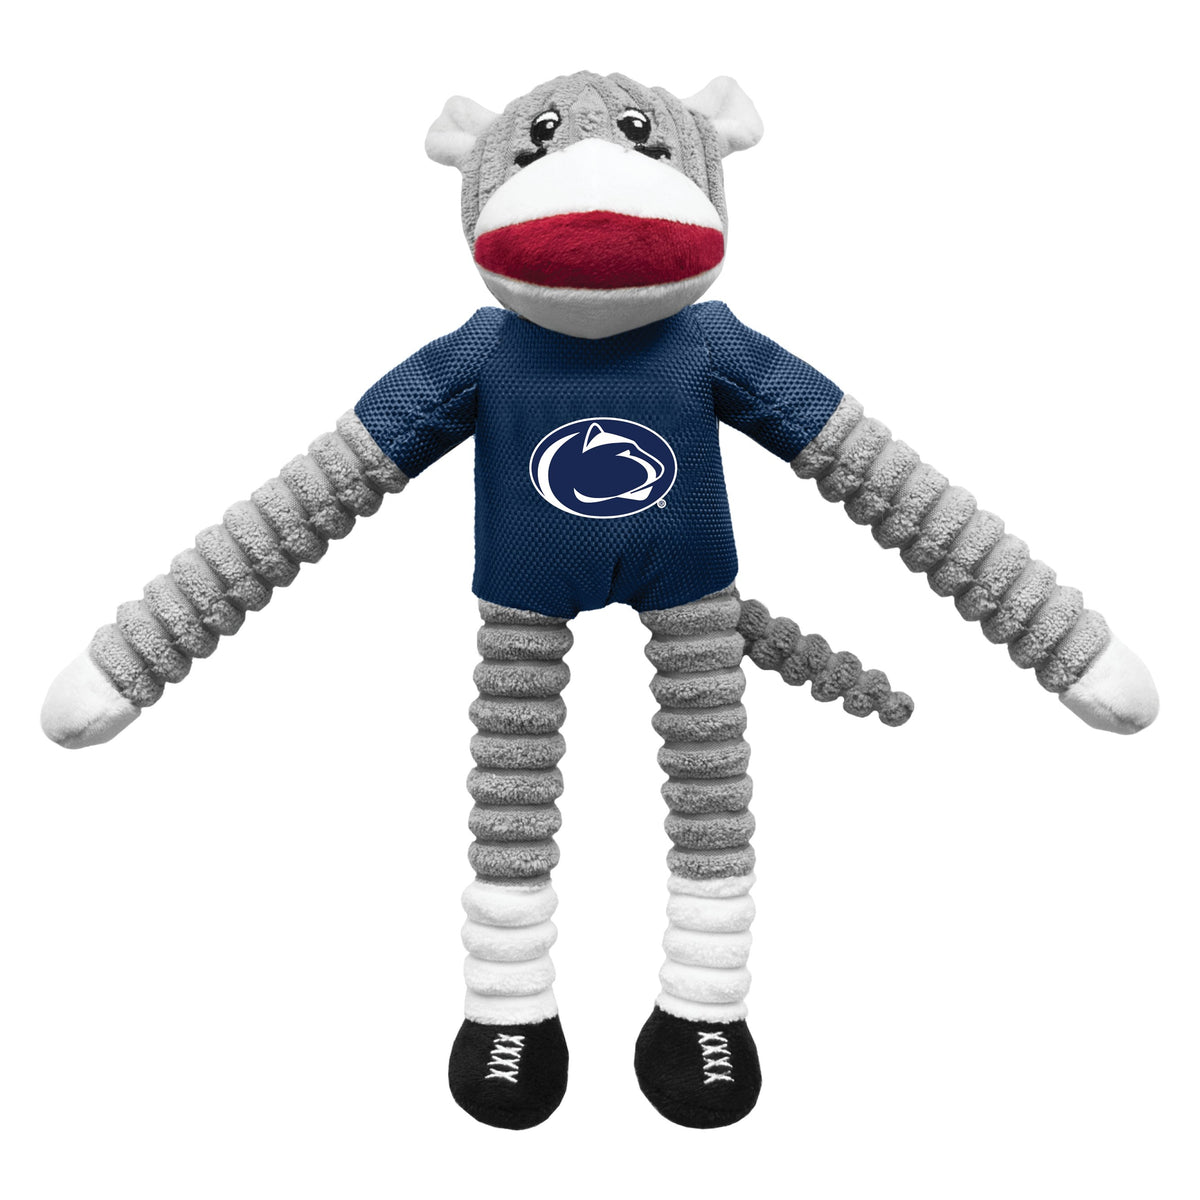 Penn State Nittany Lions Sock Monkey Toy - 3 Red Rovers